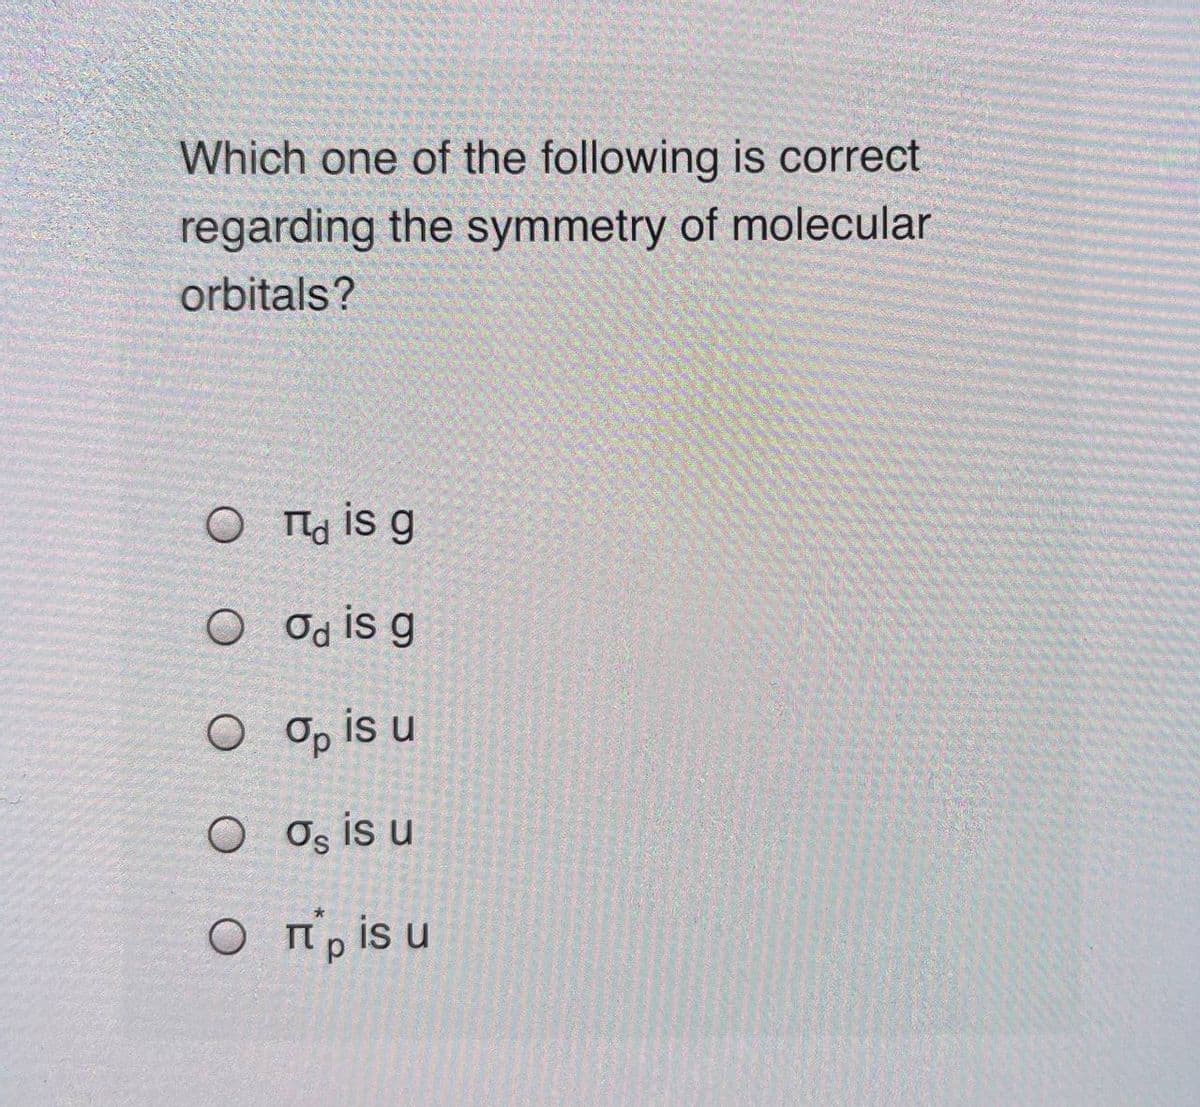 Which one of the following is correct
regarding the symmetry of molecular
orbitals?
O Ta is g
O Od is g
O O, is u
O Os is u
O n, is u
